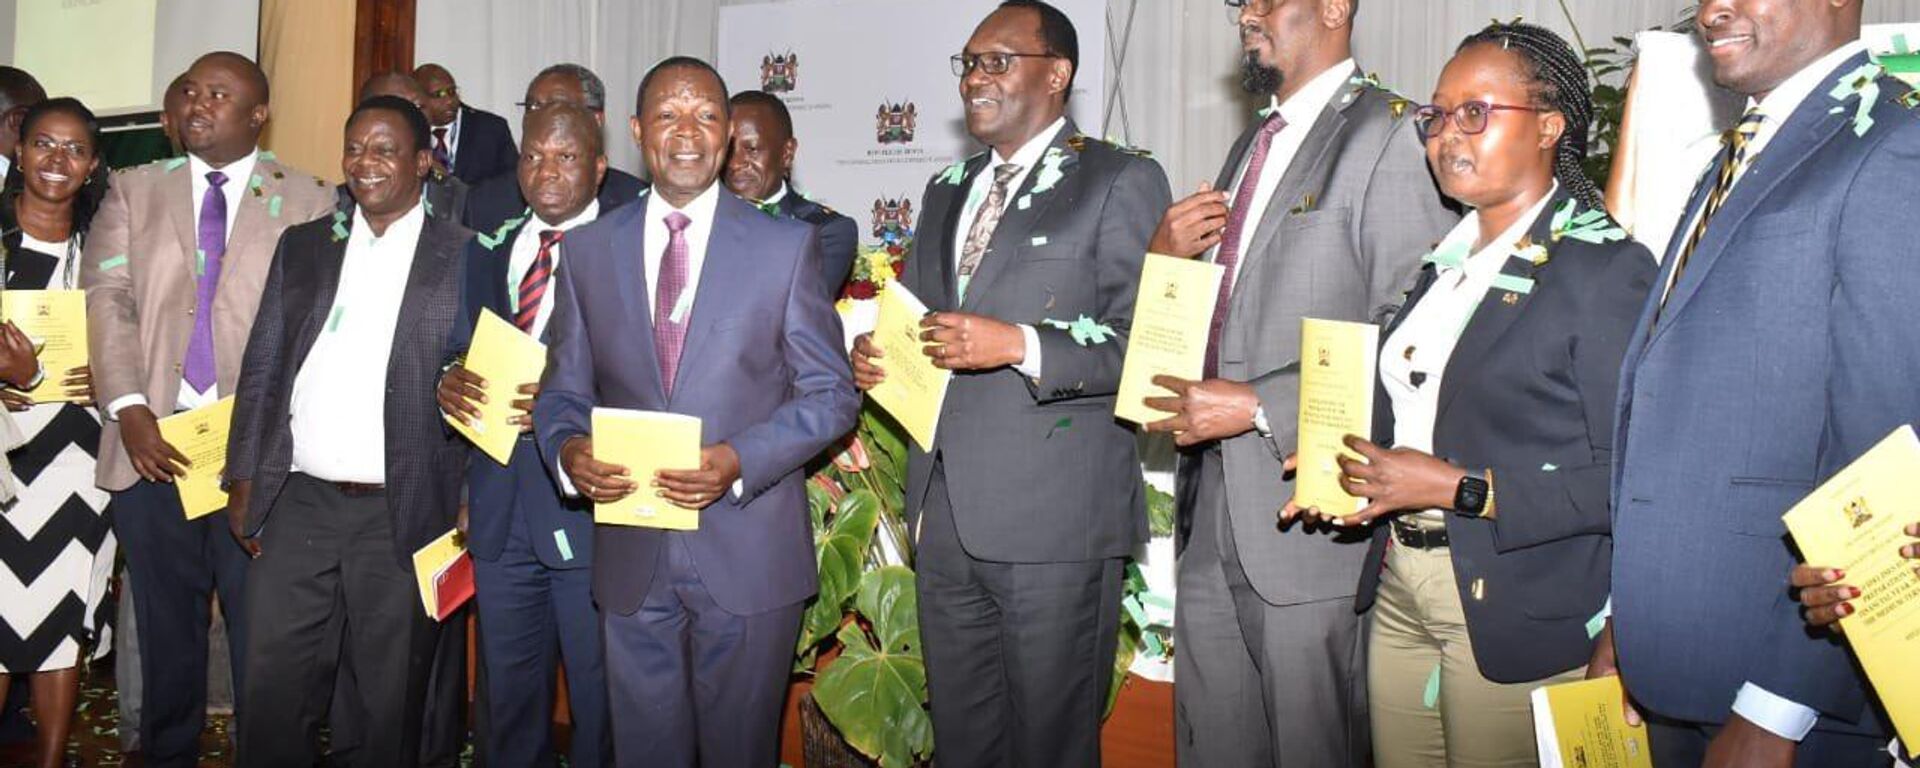 Cabinet Secretary Prof. Njuguna Ndung'u and other officials of Kenya's National Treasury launch the budget preparation process for the FY 2024/25 and the medium-term.  - Sputnik Africa, 1920, 20.08.2023